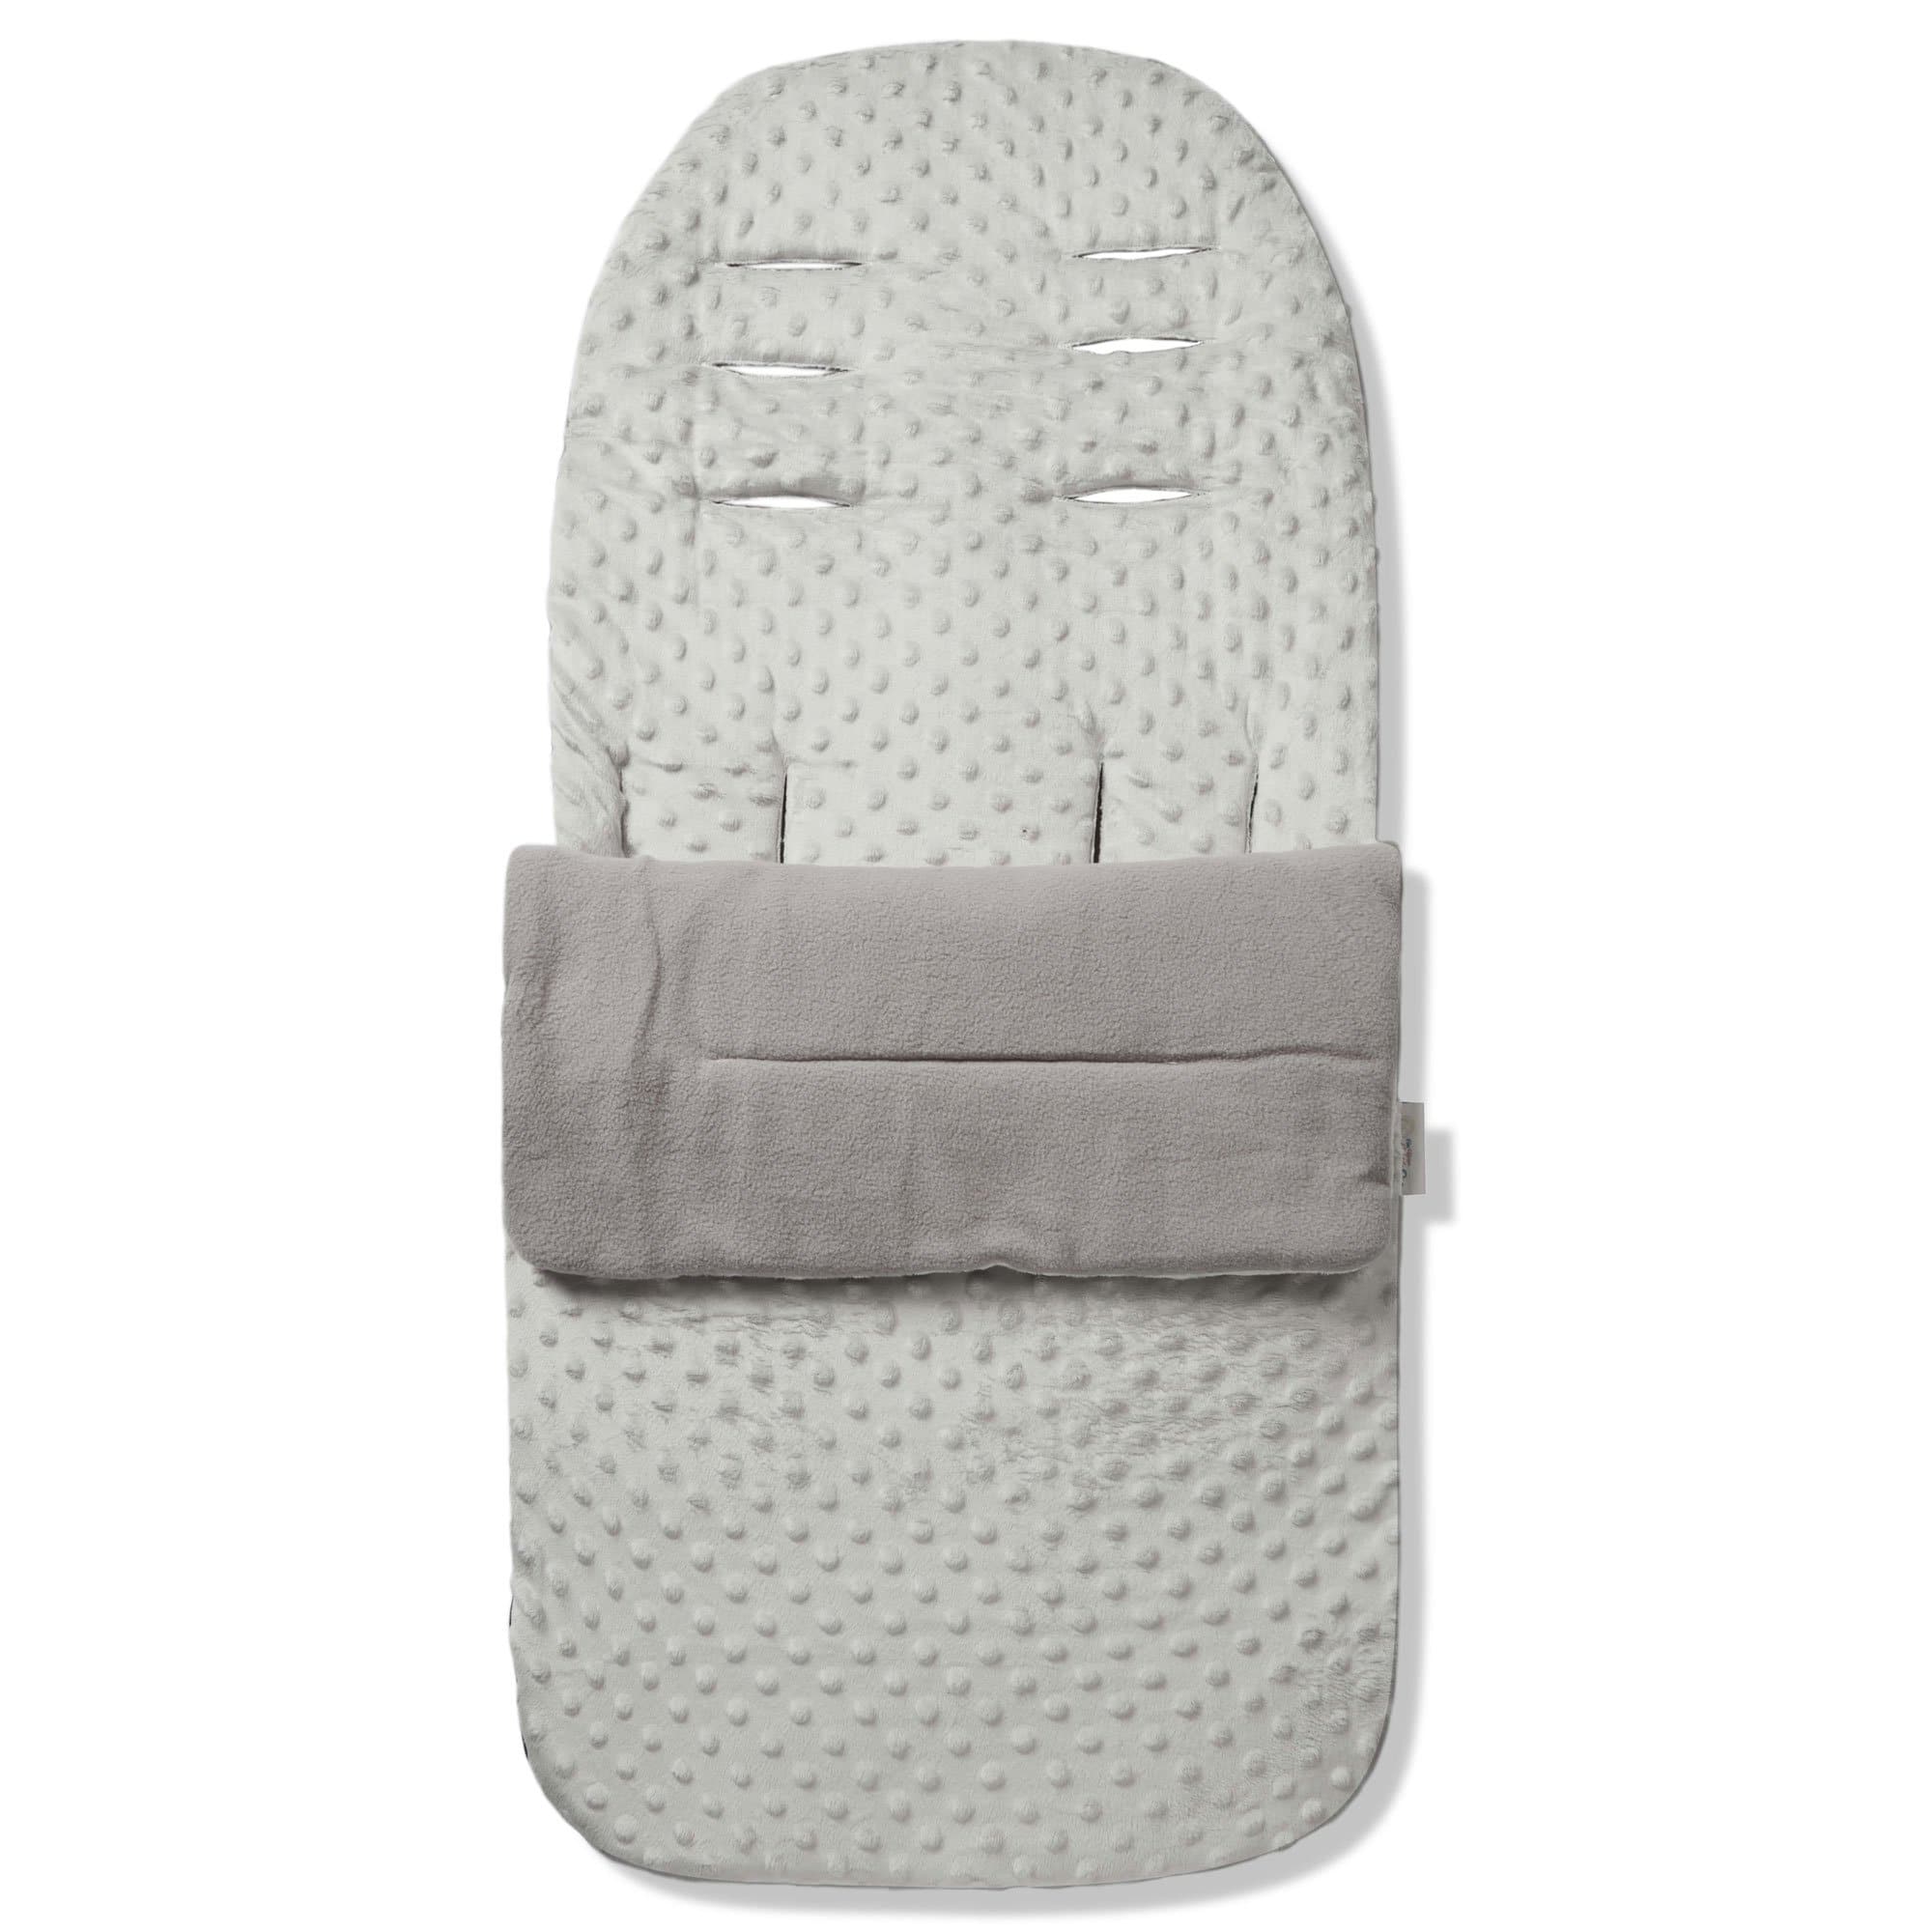 Dimple Footmuff / Cosy Toes Compatible with Recaro - Grey / Fits All Models | For Your Little One